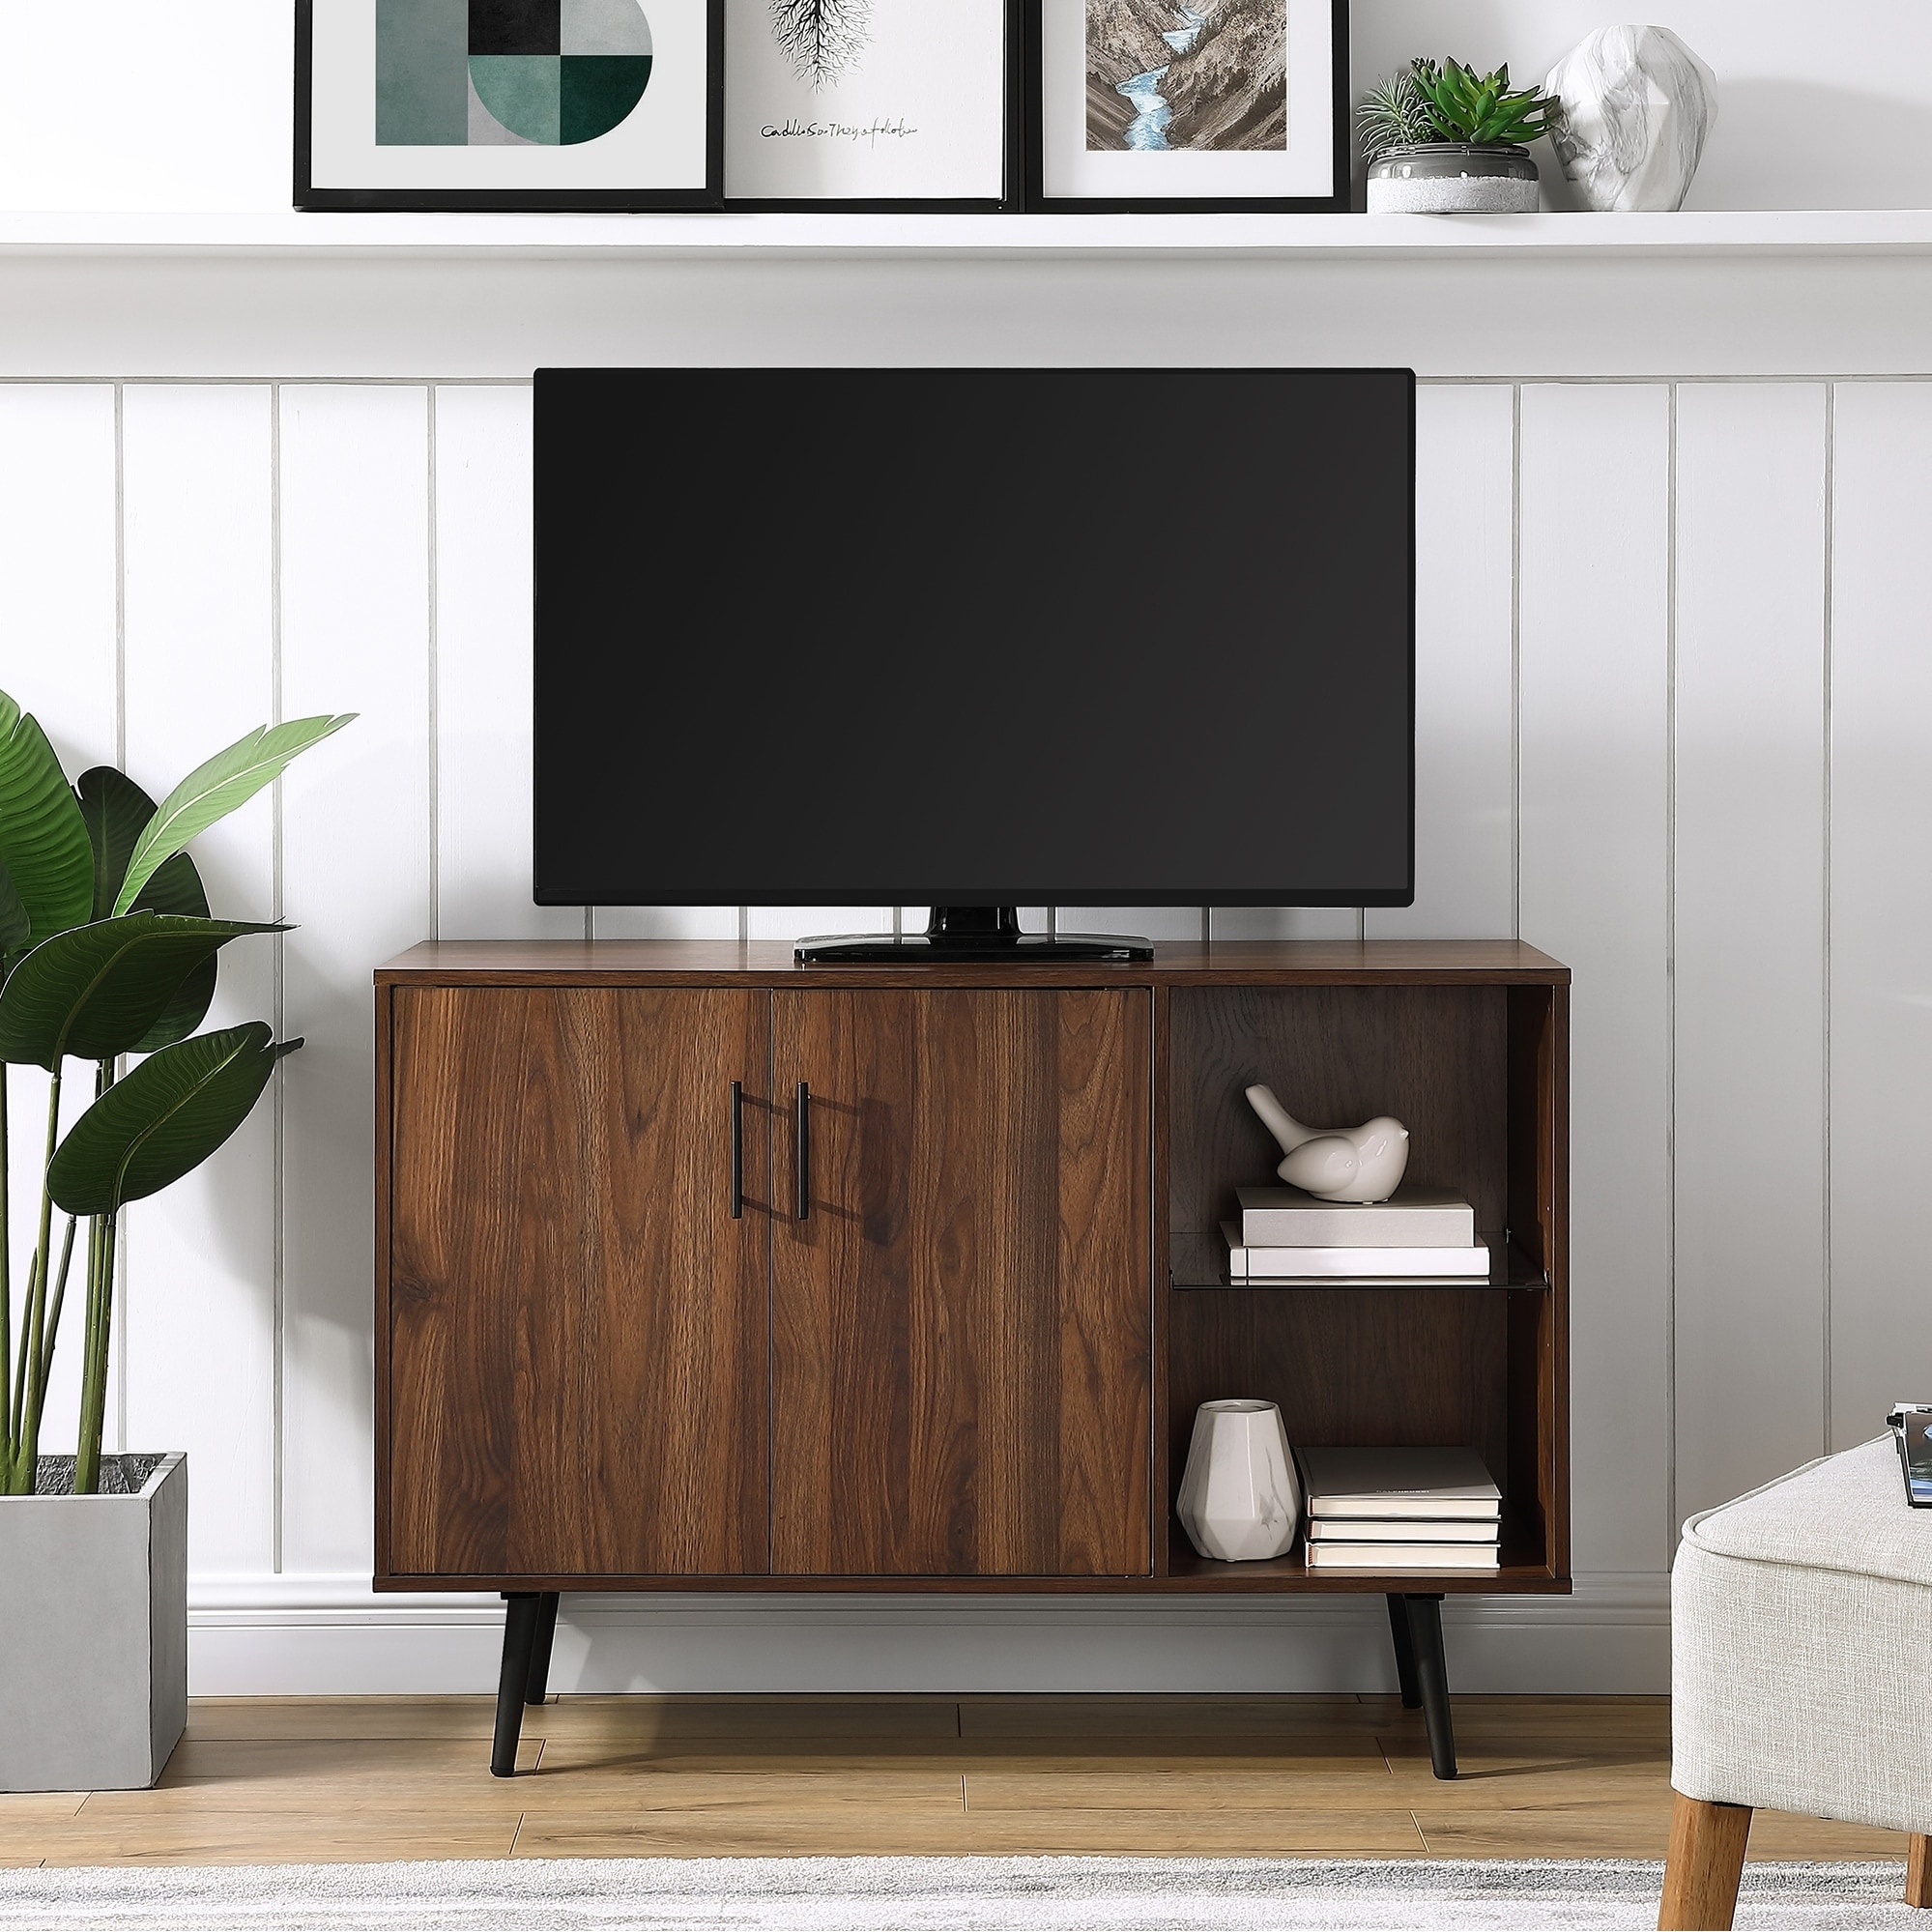 Shop 44" Mid-Century Modern Buffet / TV Stand Console - 44 x 16 x 30h - On Sale - Free Shipping